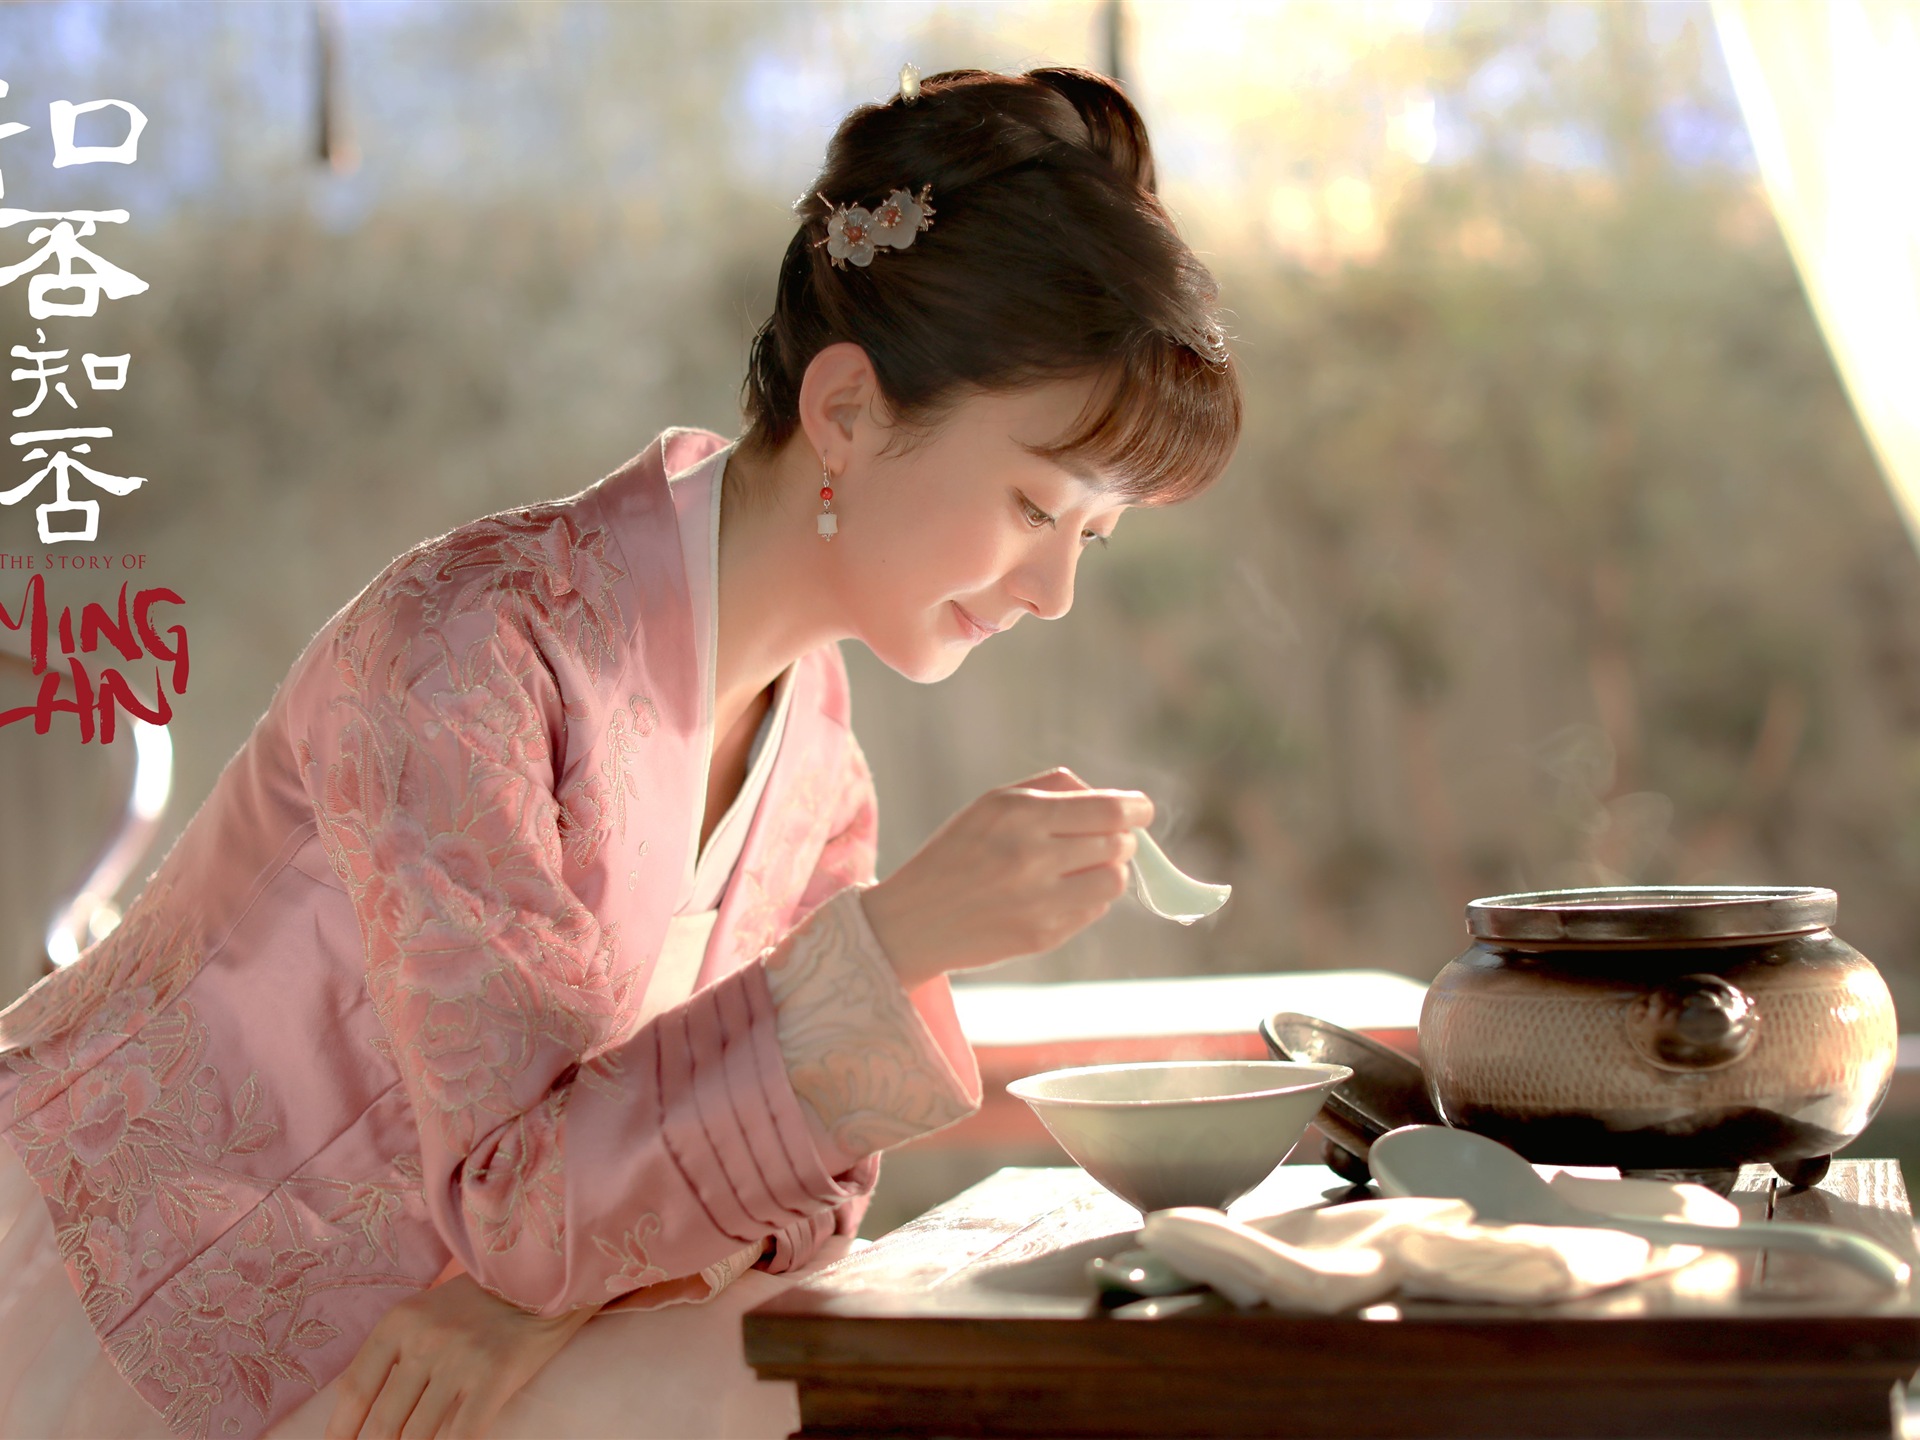 The Story Of MingLan, TV series HD wallpapers #29 - 1920x1440